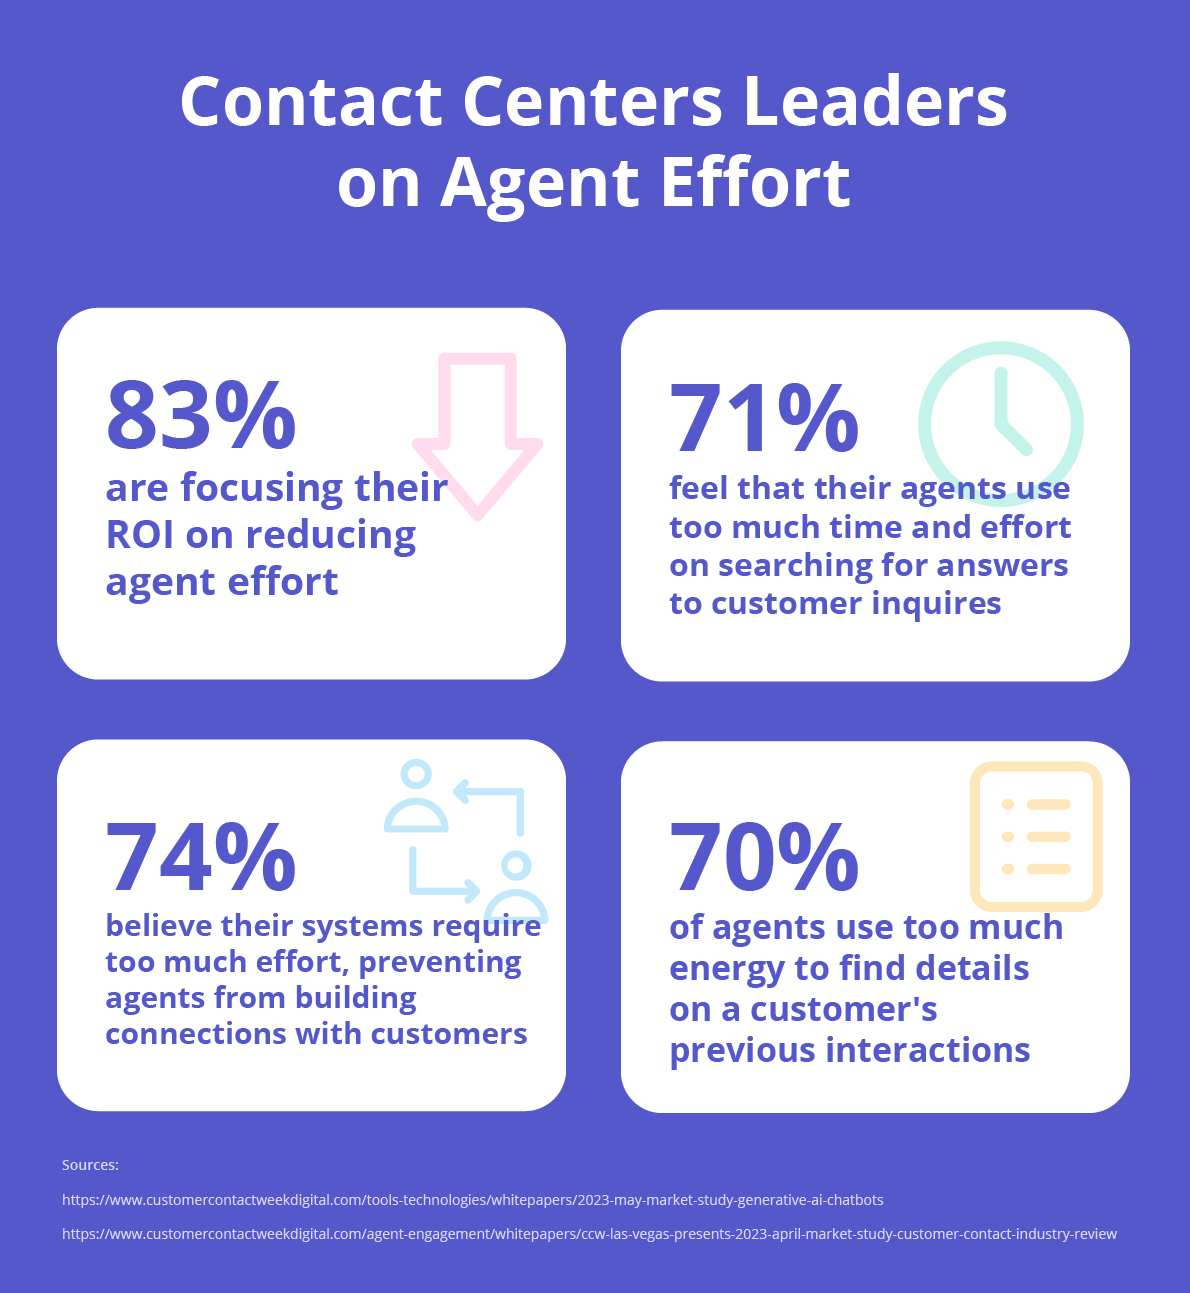 Contact Centers Leader statistics on Agent Effort